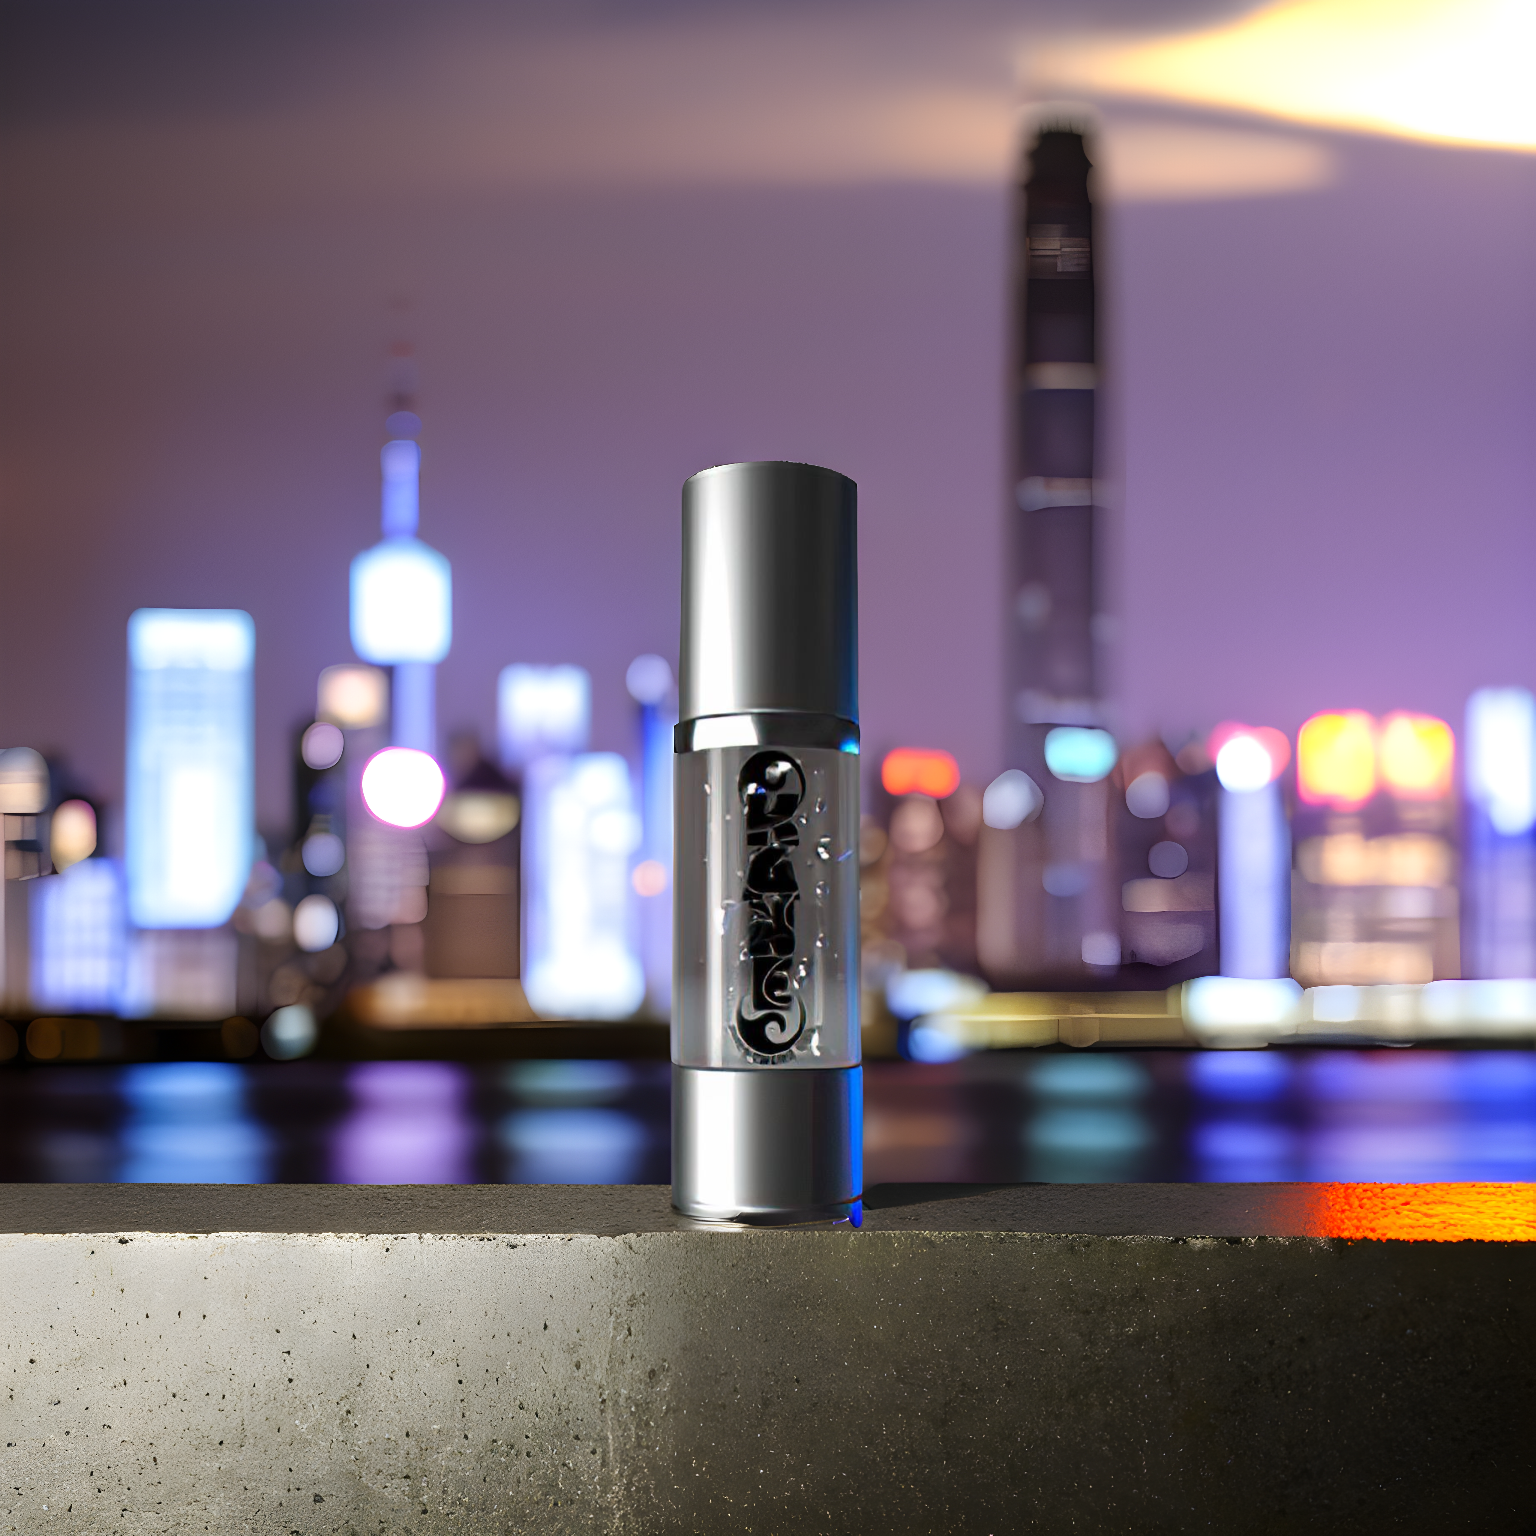 KANE™ Pheromone Gel by Royal Pheromones against a city skyline at night, ideal for homosexual men seeking respect and communication in work environments, unscented and ultra-concentrated, compatible with favorite fragrances.